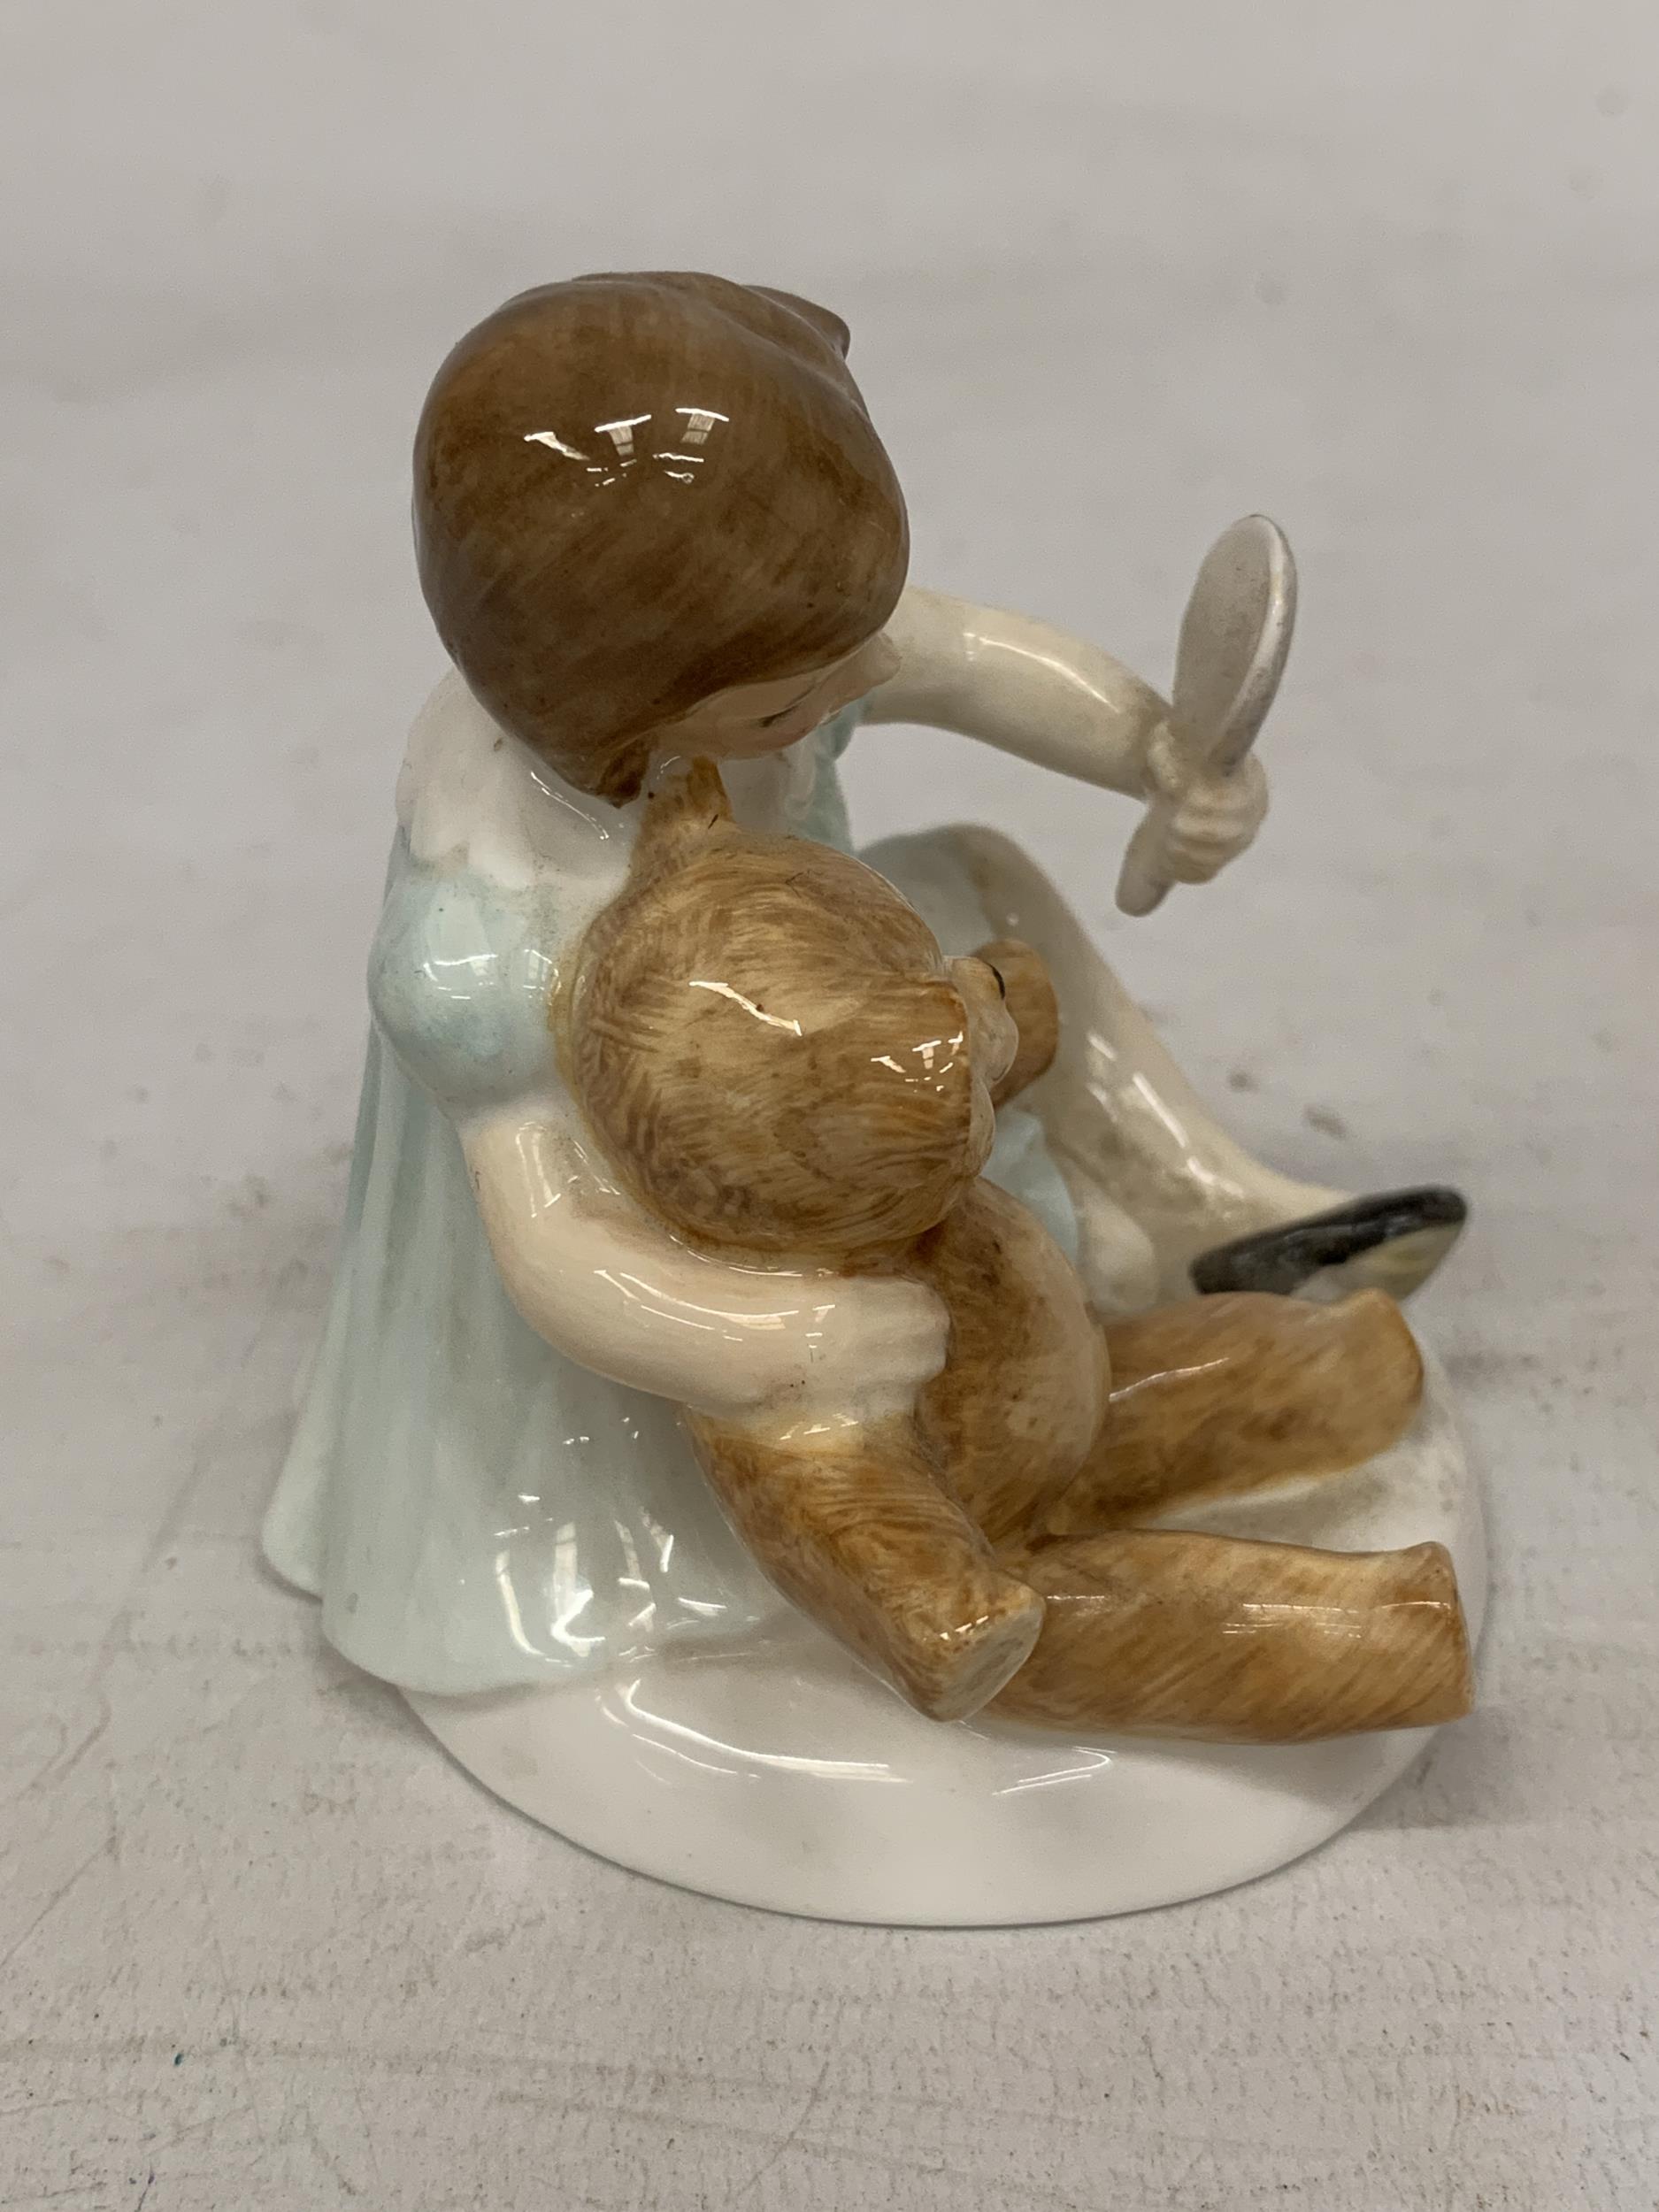 A ROYAL DOULTON FIGURE "MY TEDDY" HN 2177 - Image 2 of 5